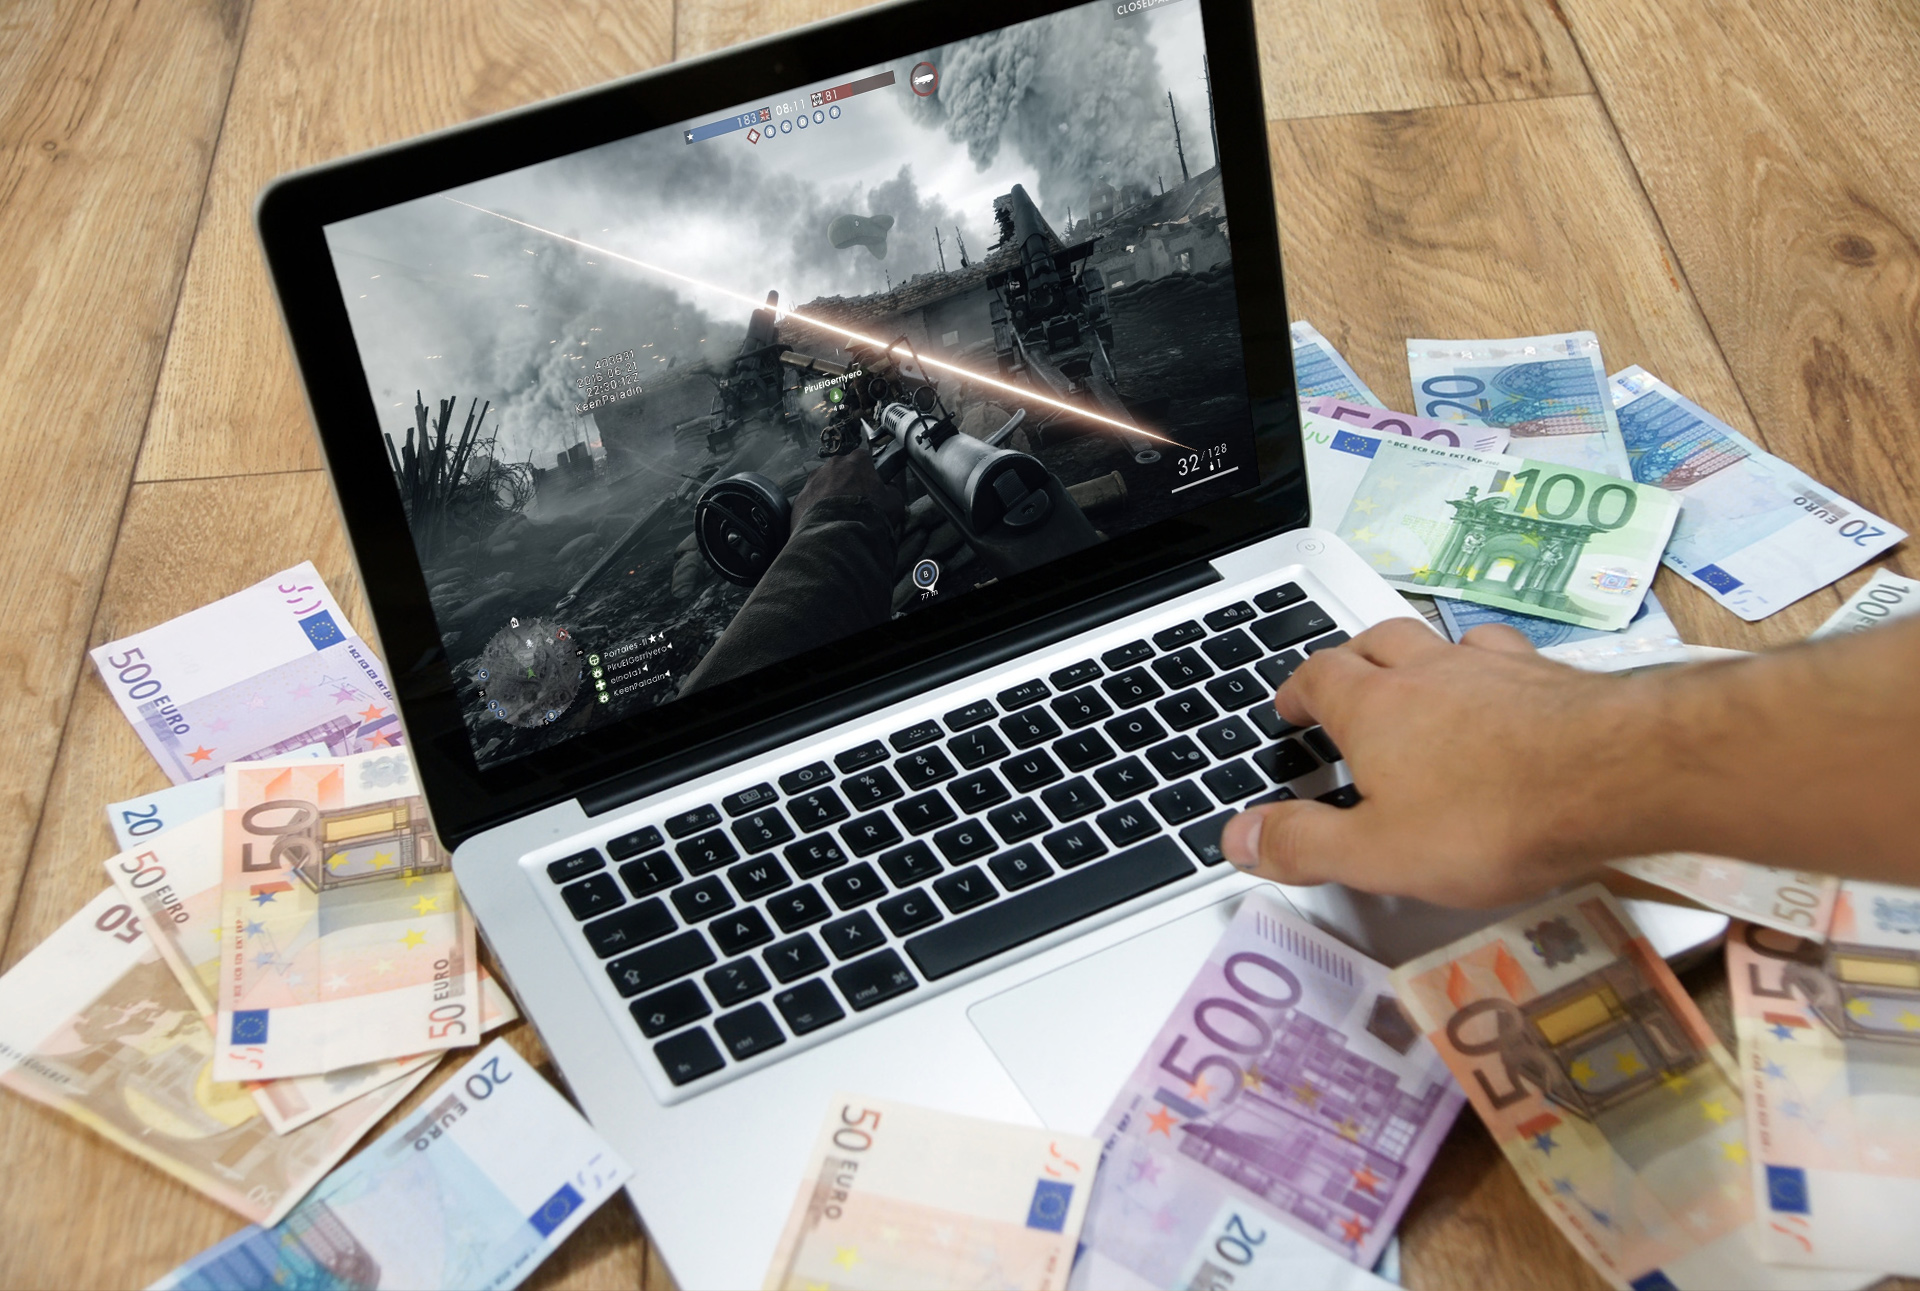 How to make money from your laptop